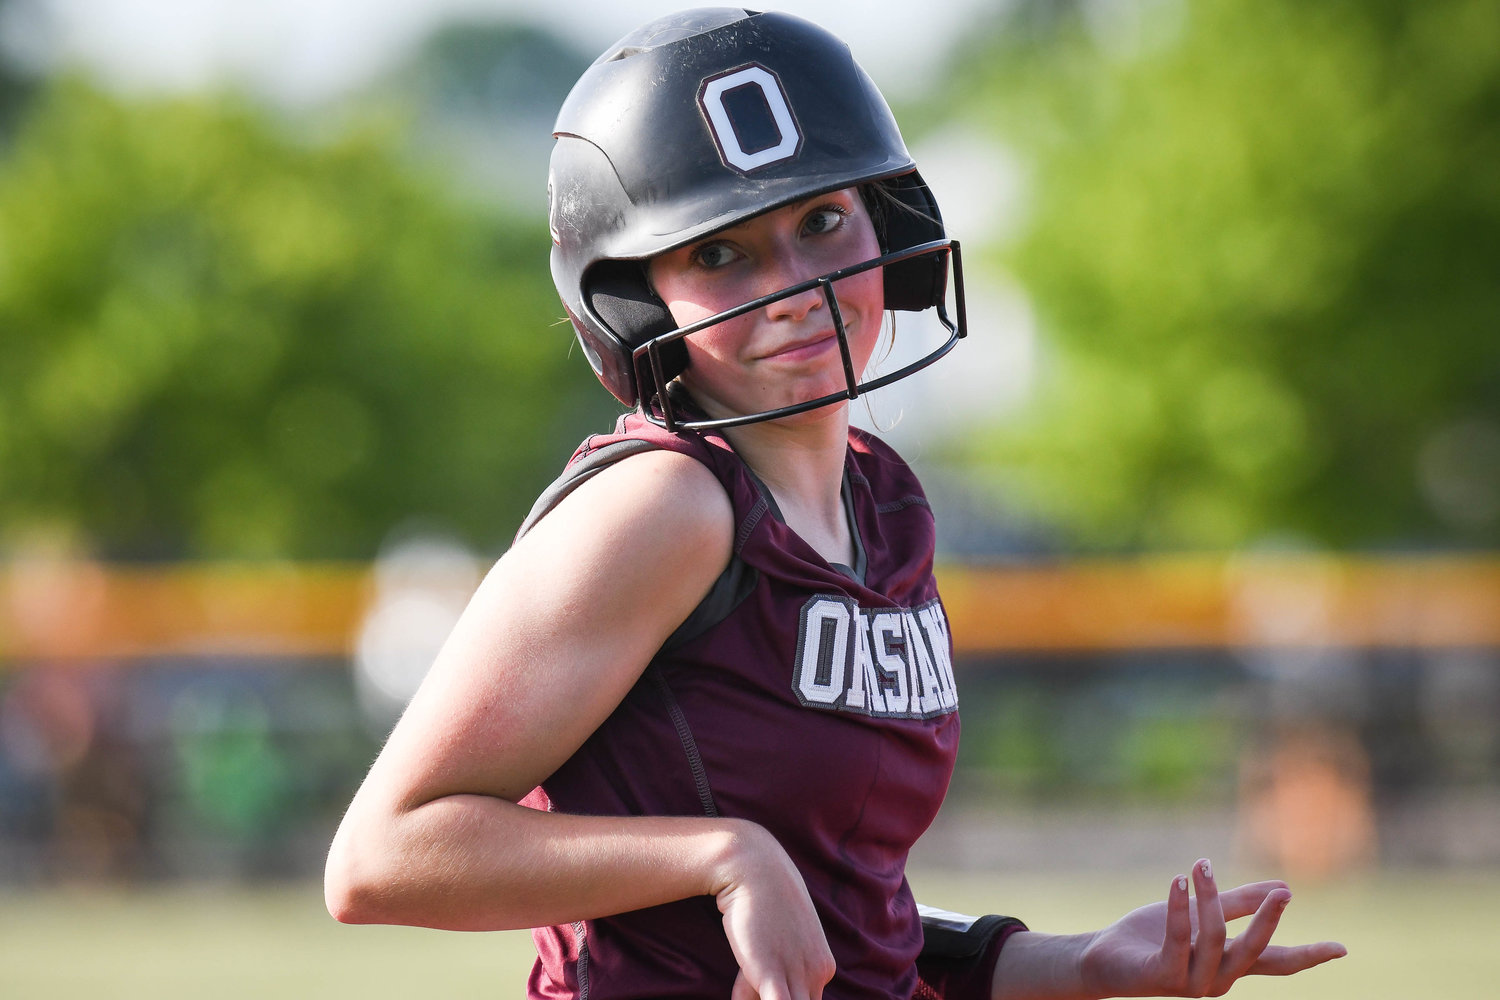 Oriskany player Juliet Tagaliaferri shrugs at her coach after making it safely to third base during the Section III Class D final against Poland on Tuesday at Carrier Park in Syracuse. Oriskany won 5-4.